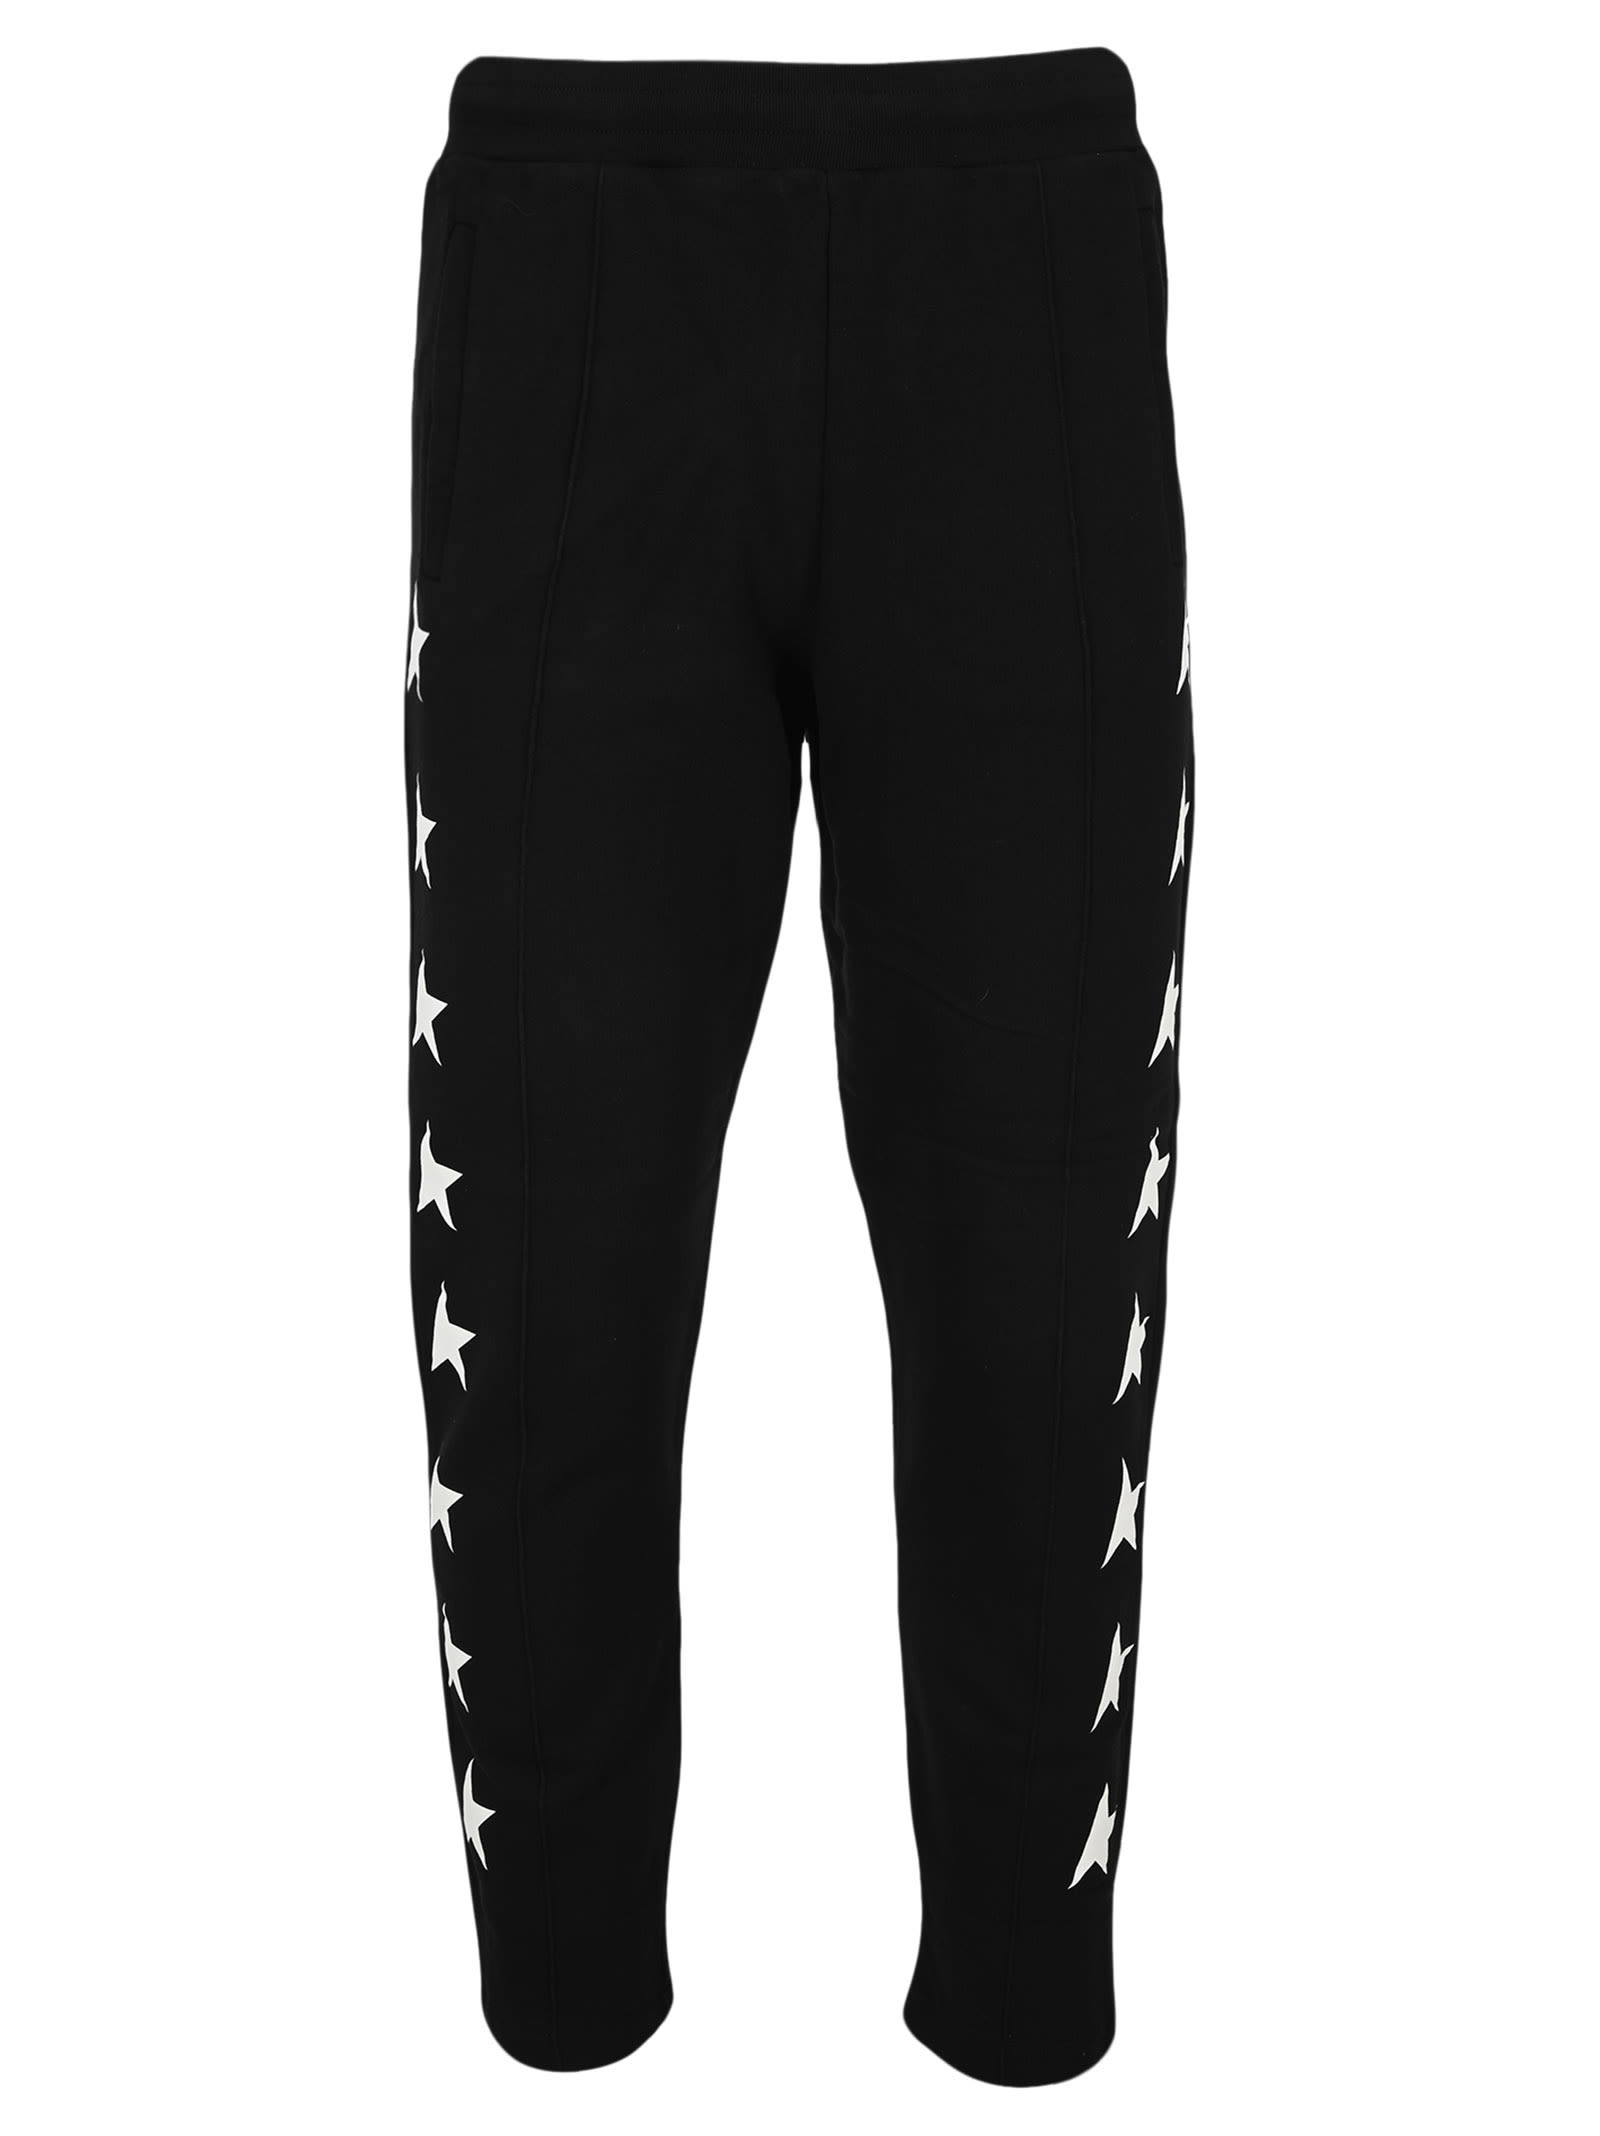 Golden Goose Black Doro Star Collection Jogging Pants With Contrasting White Stars